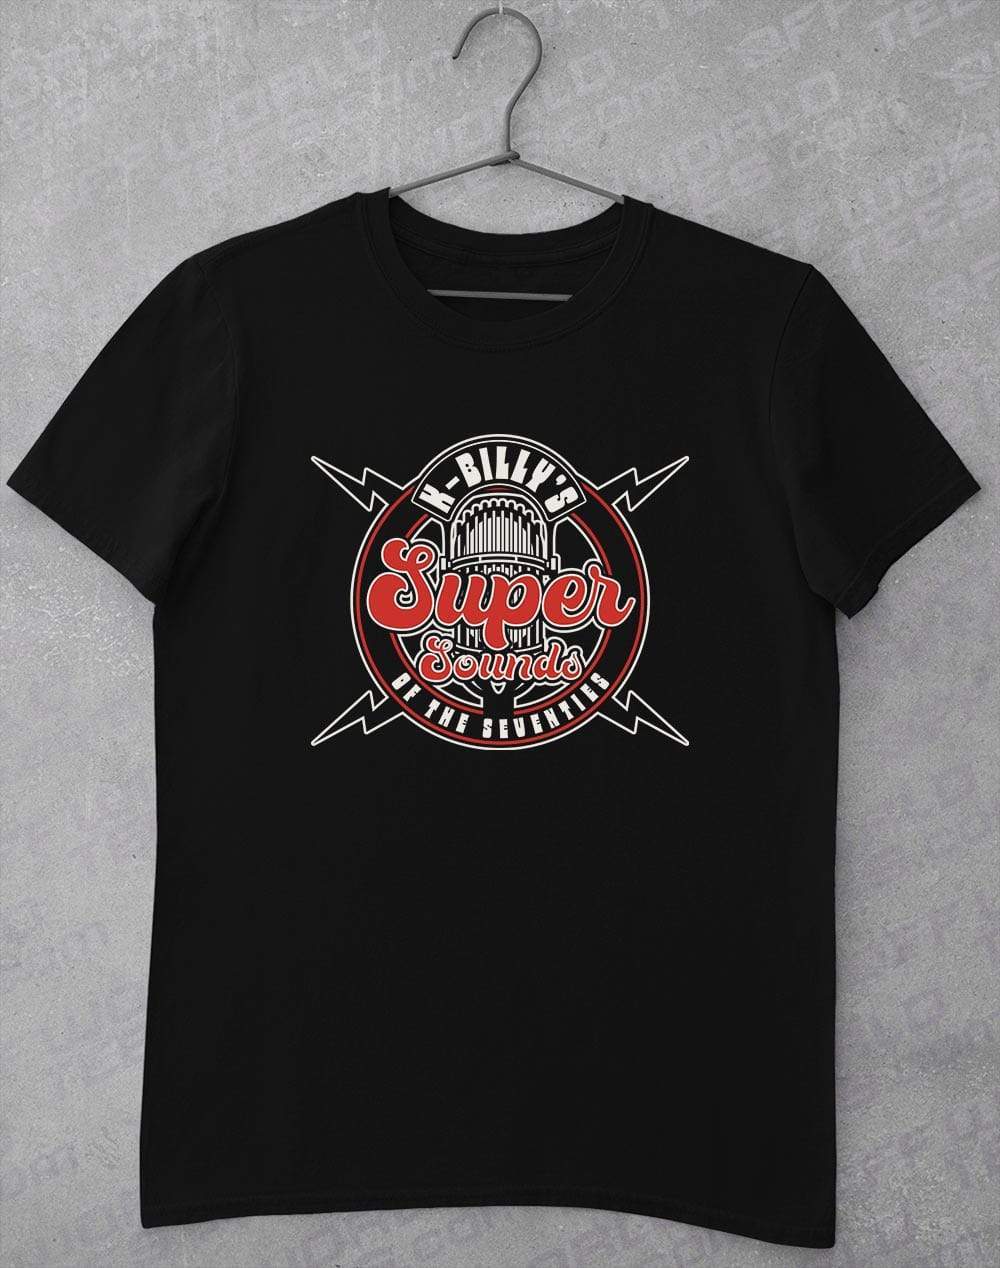 K-Billy's Super Sounds of the 70's T-Shirt L / Black  - Off World Tees